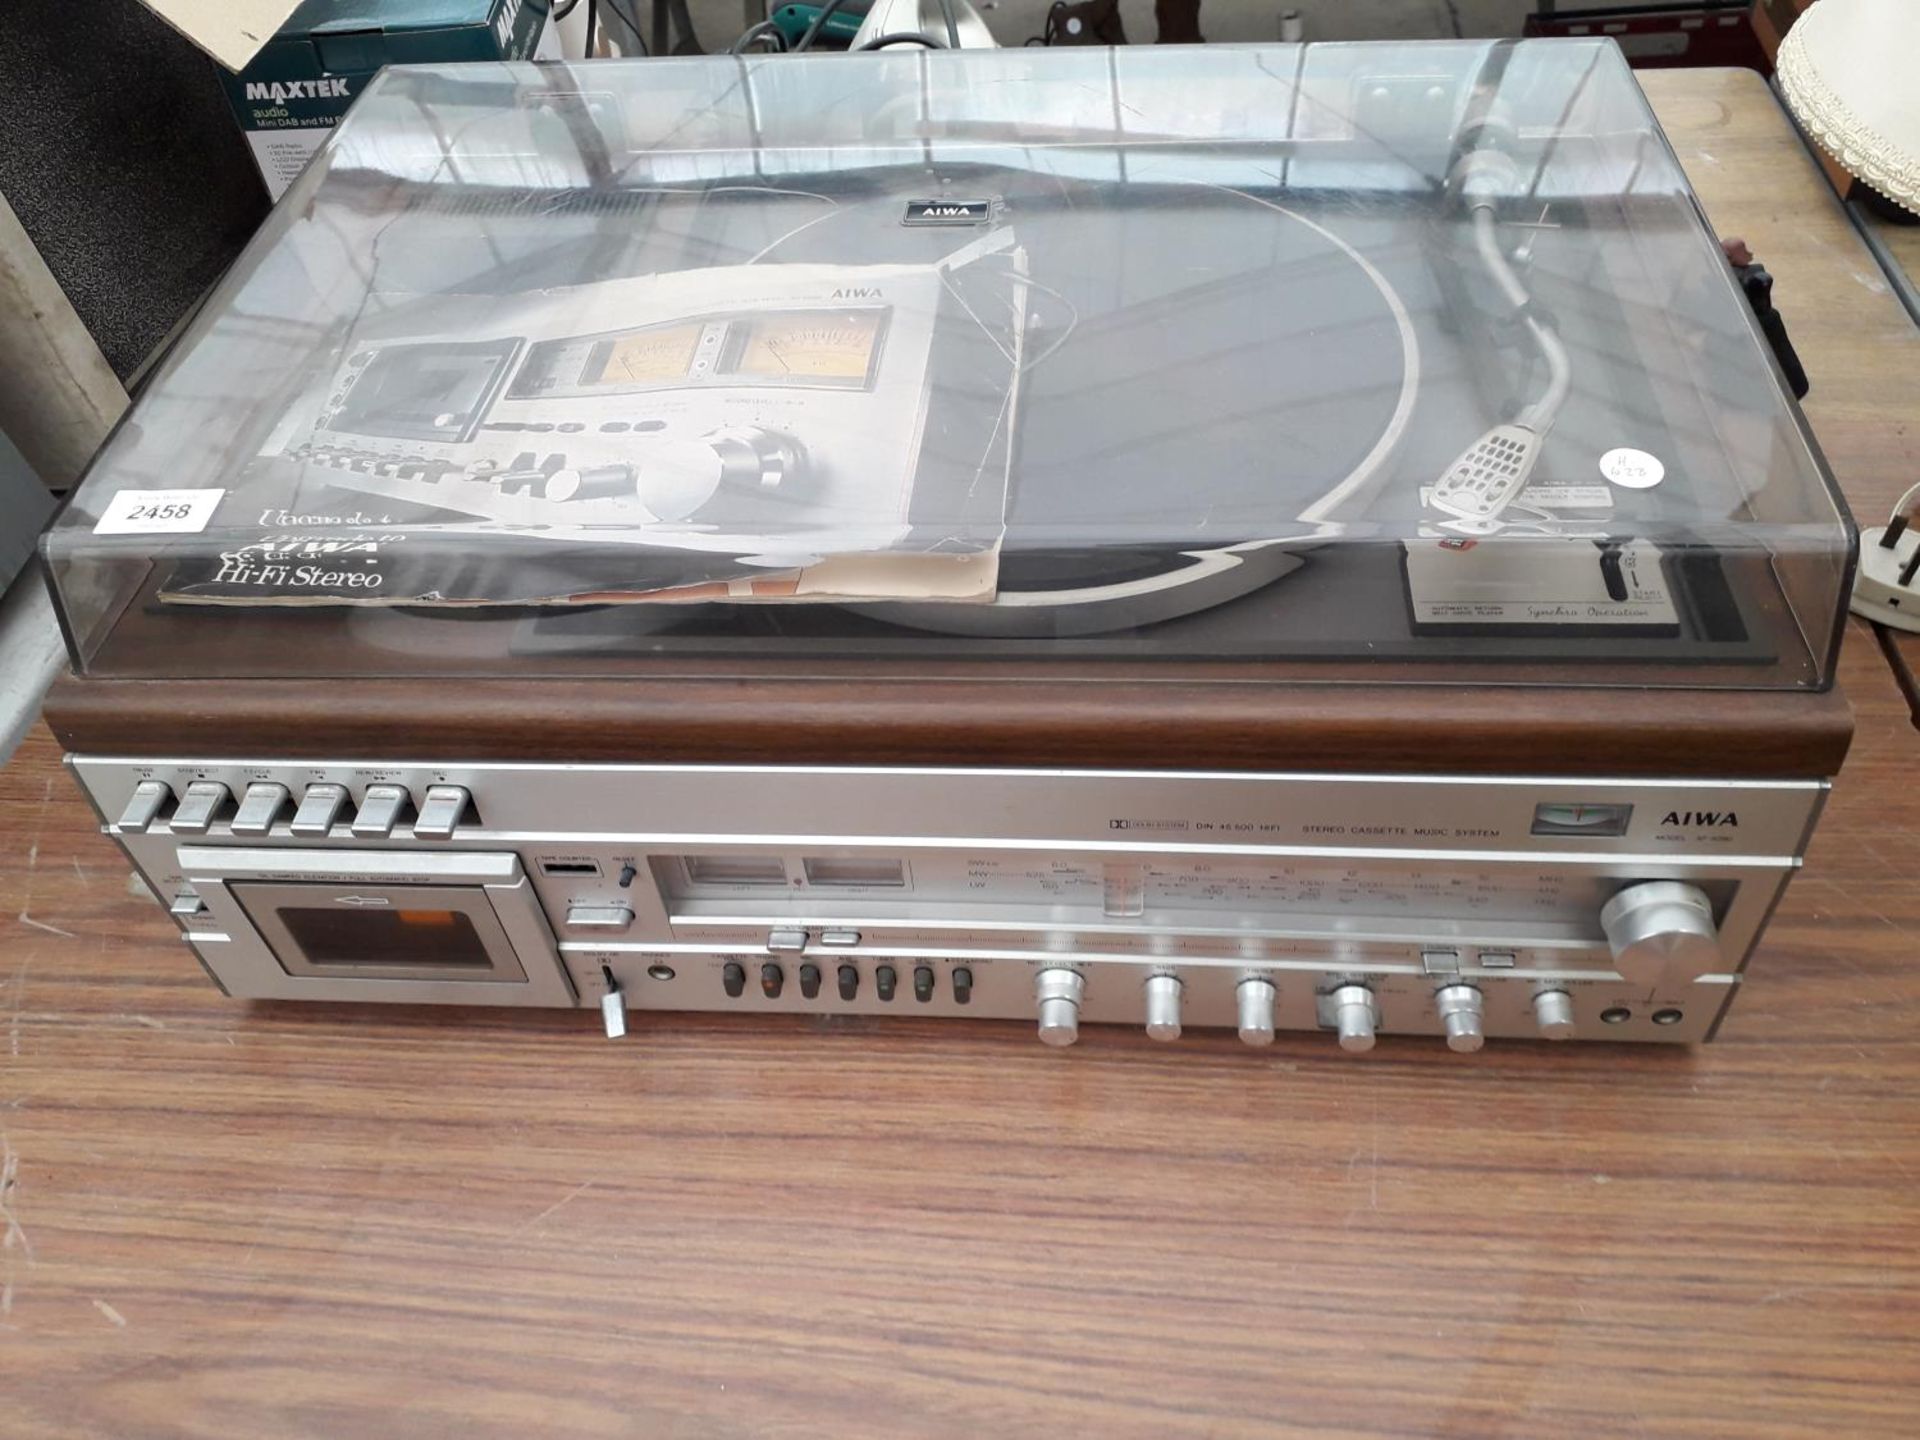 AN AIWA MODEL AF-5090 STEREO CASSETTE MUSIC SYSTEM